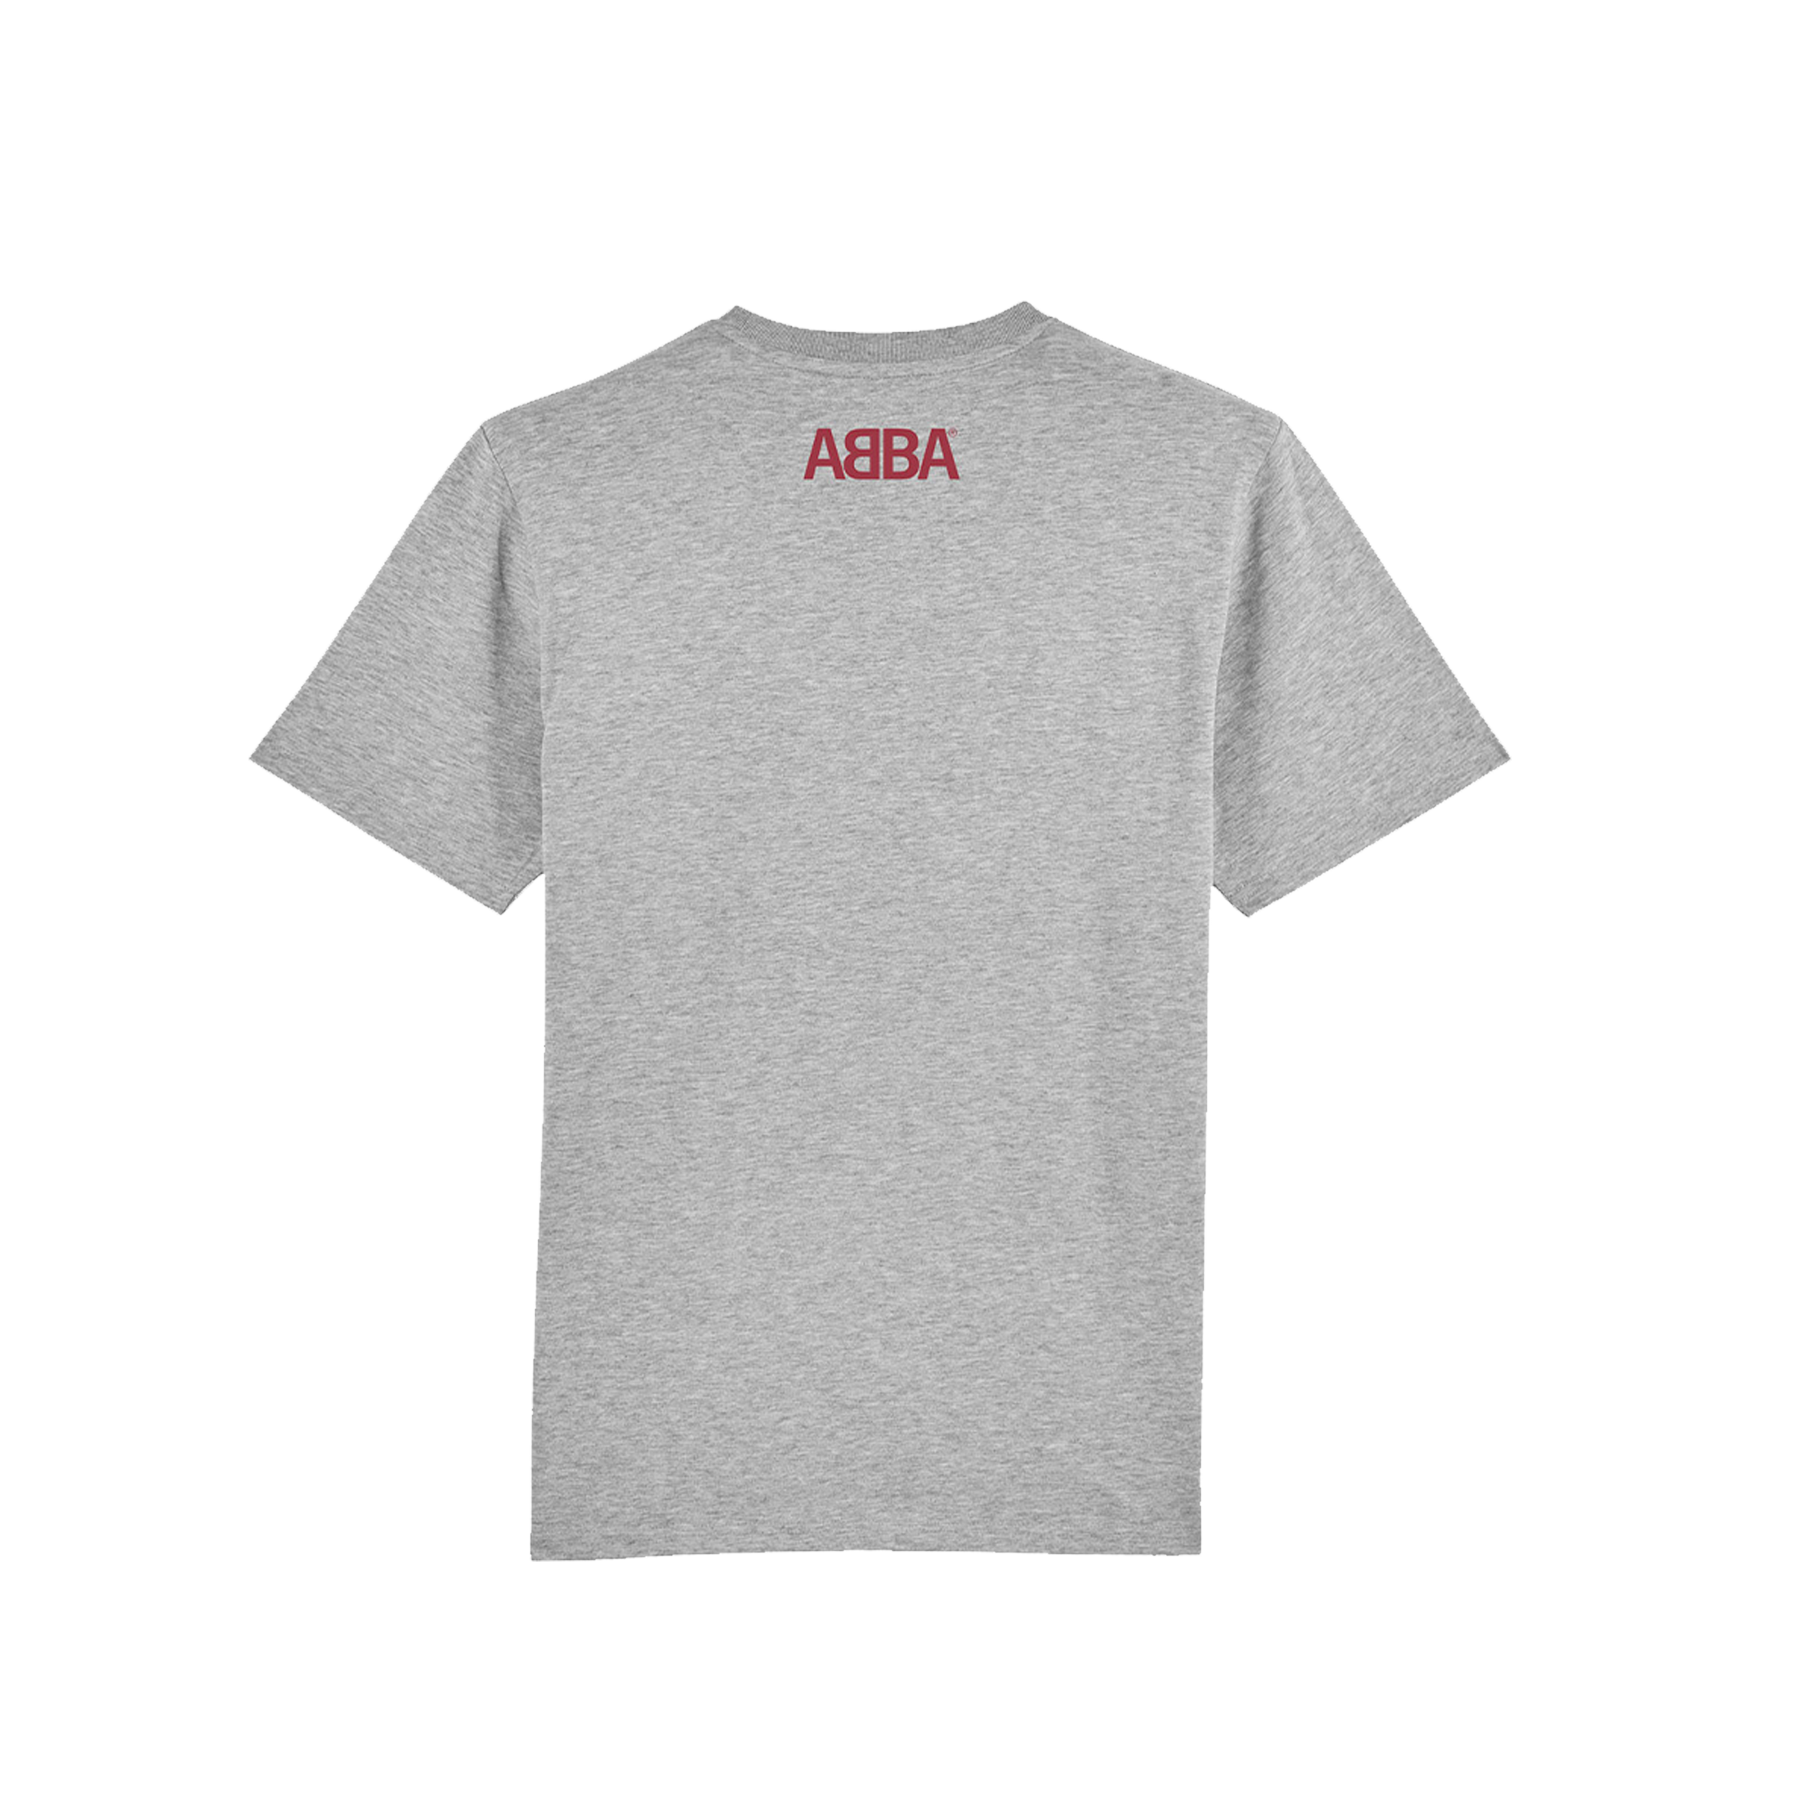 ABBA - One Of Us T-shirt